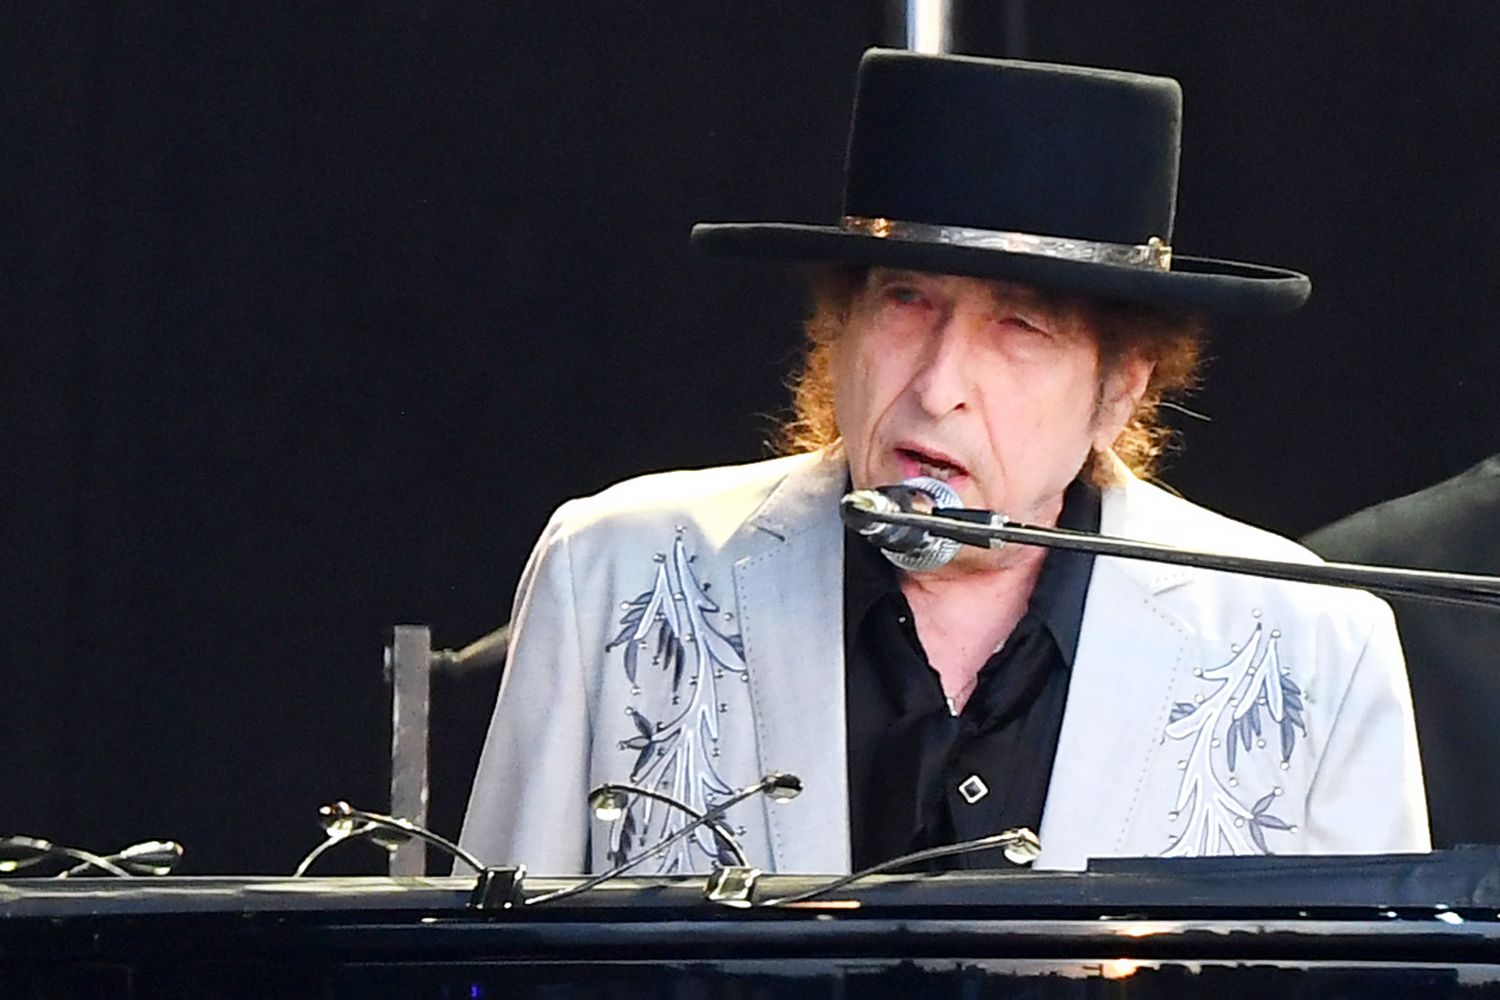 Bob Dylan performs on a double bill with Neil Young at Hyde Park on July 12, 2019 in London, England